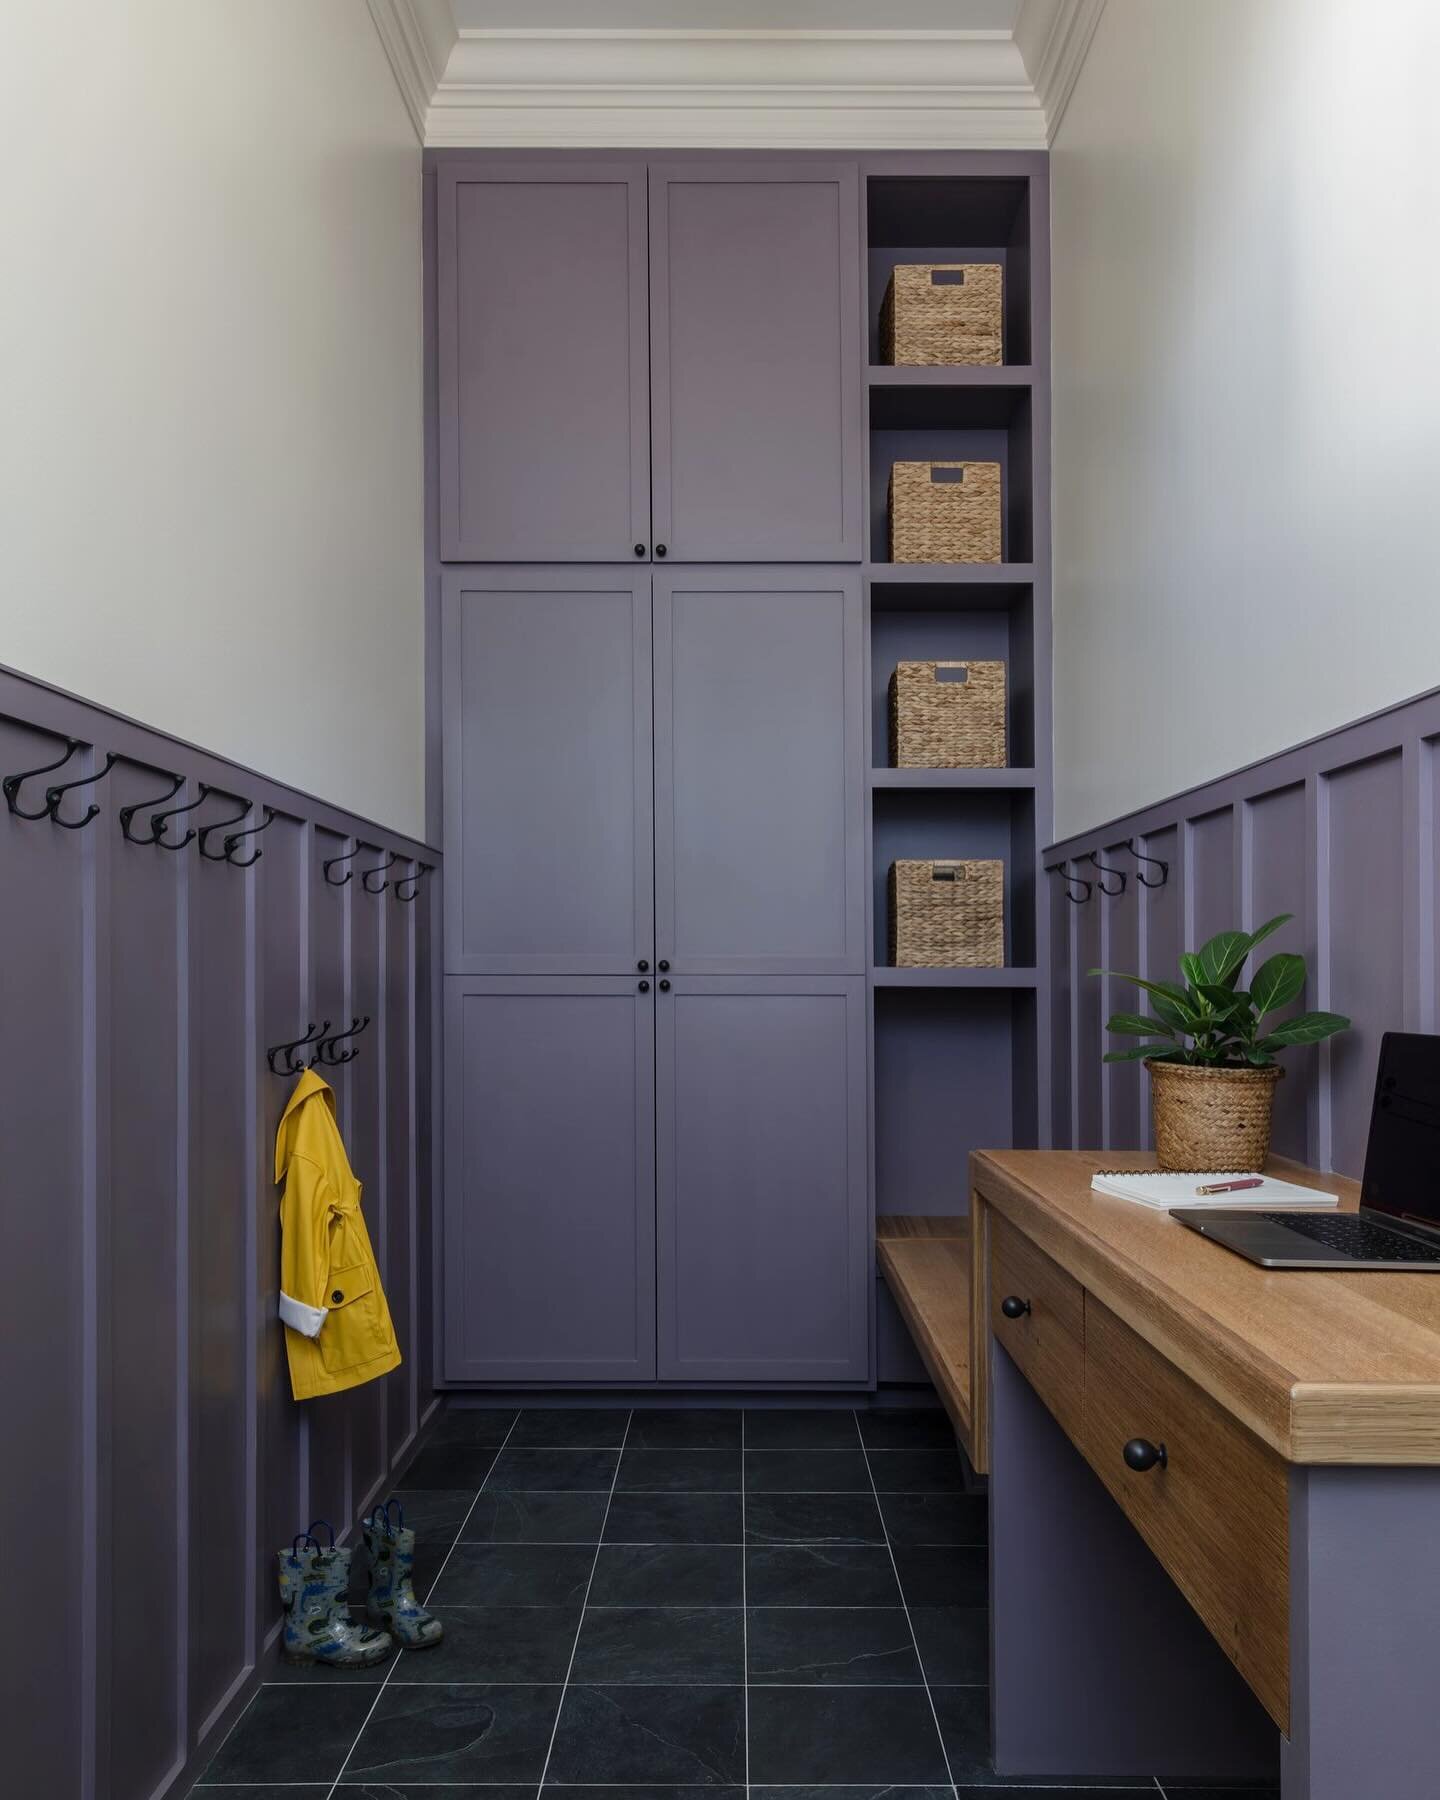 We are 12 days late but still reeling in the freshness of the New Year. Organization doesn&rsquo;t have to be beige, as shown here in the paneled mudroom at St. Thomas Street. A built in desk keeps the mail at bay, and a custom, 30&rdquo; deep applia